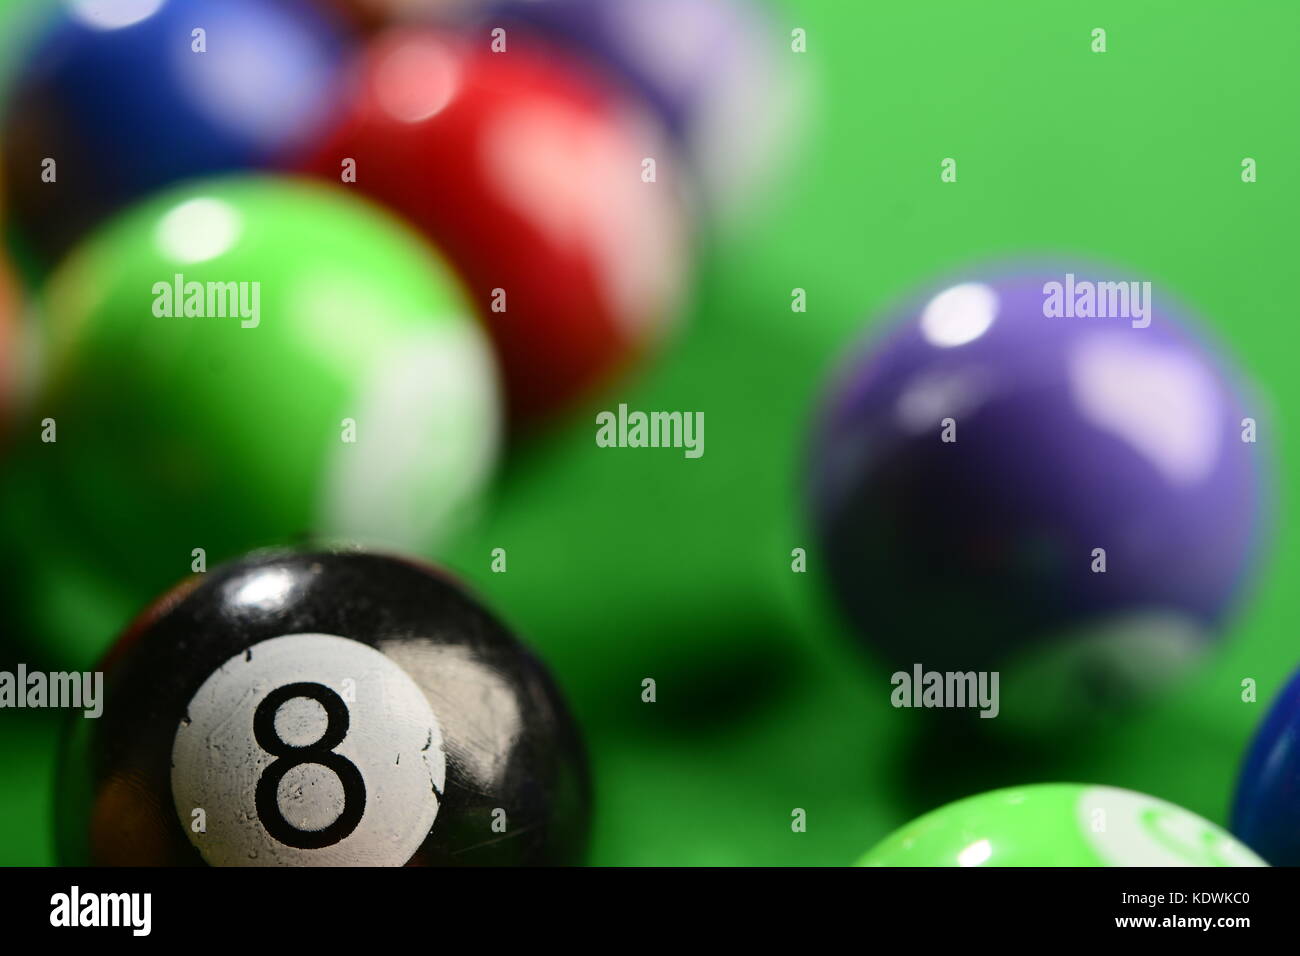 Close up of billiard balls on the table Stock Photo